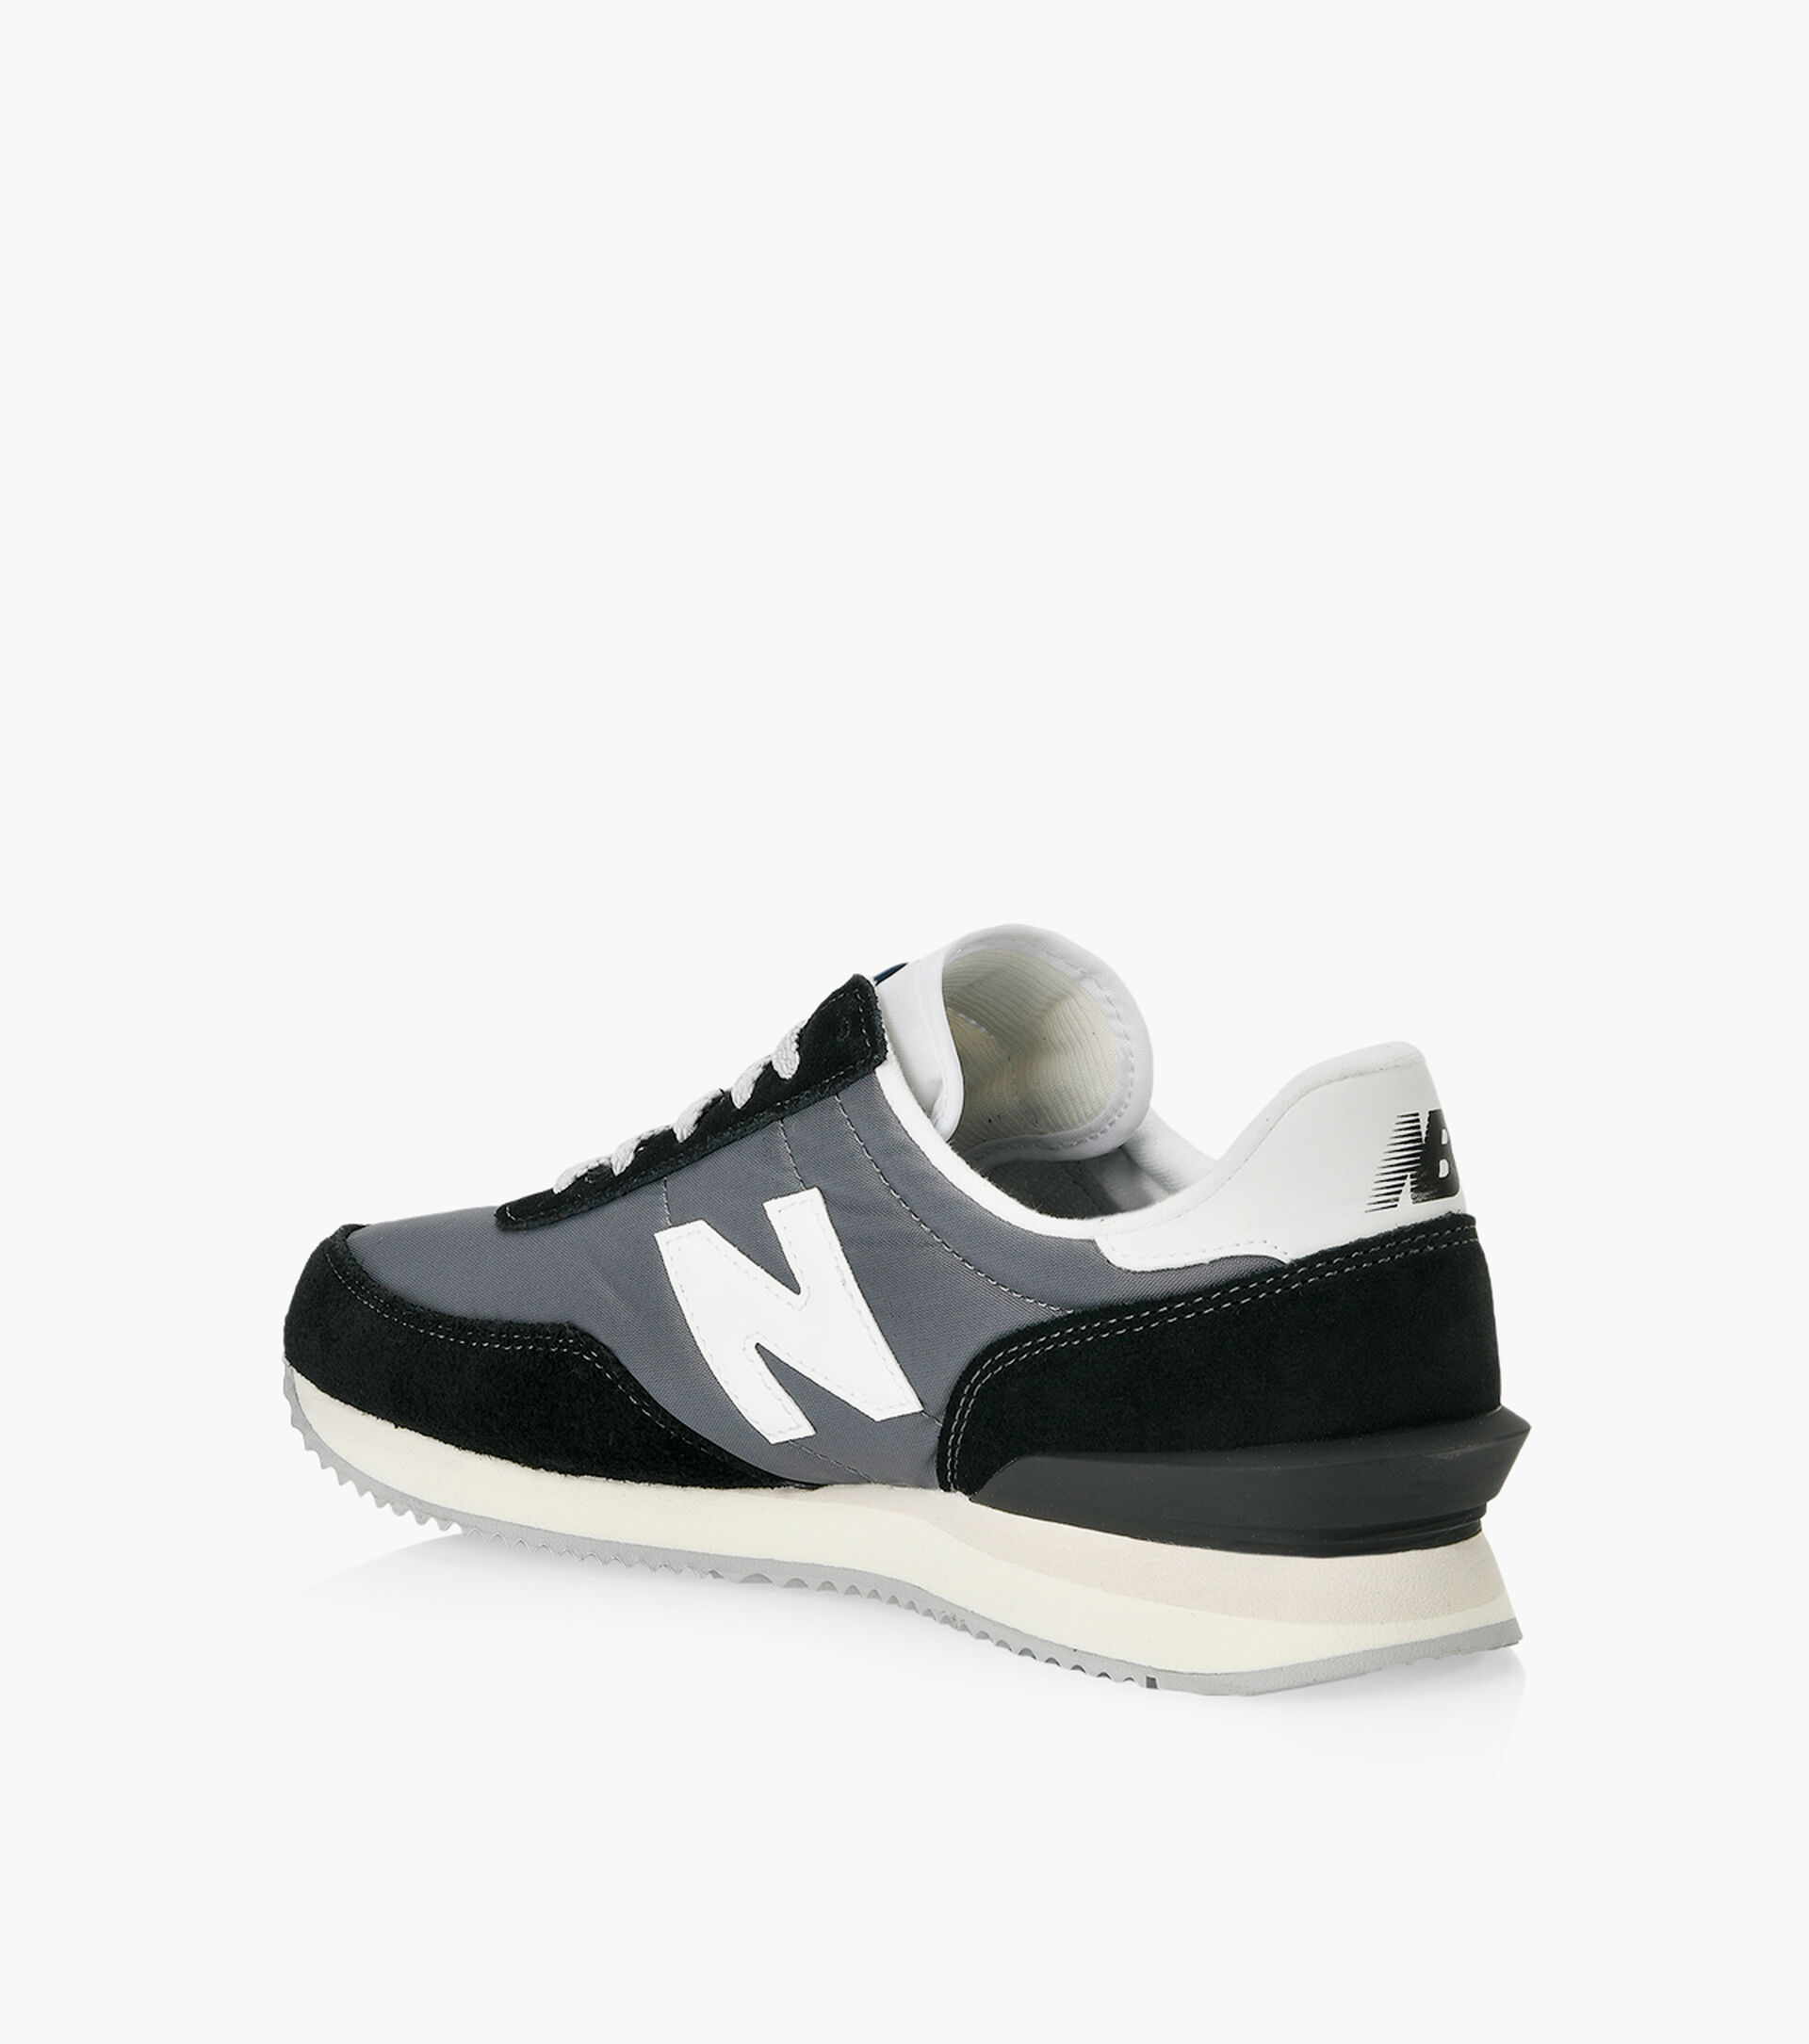 NEW BALANCE 720 - Black Fabric | Browns Shoes